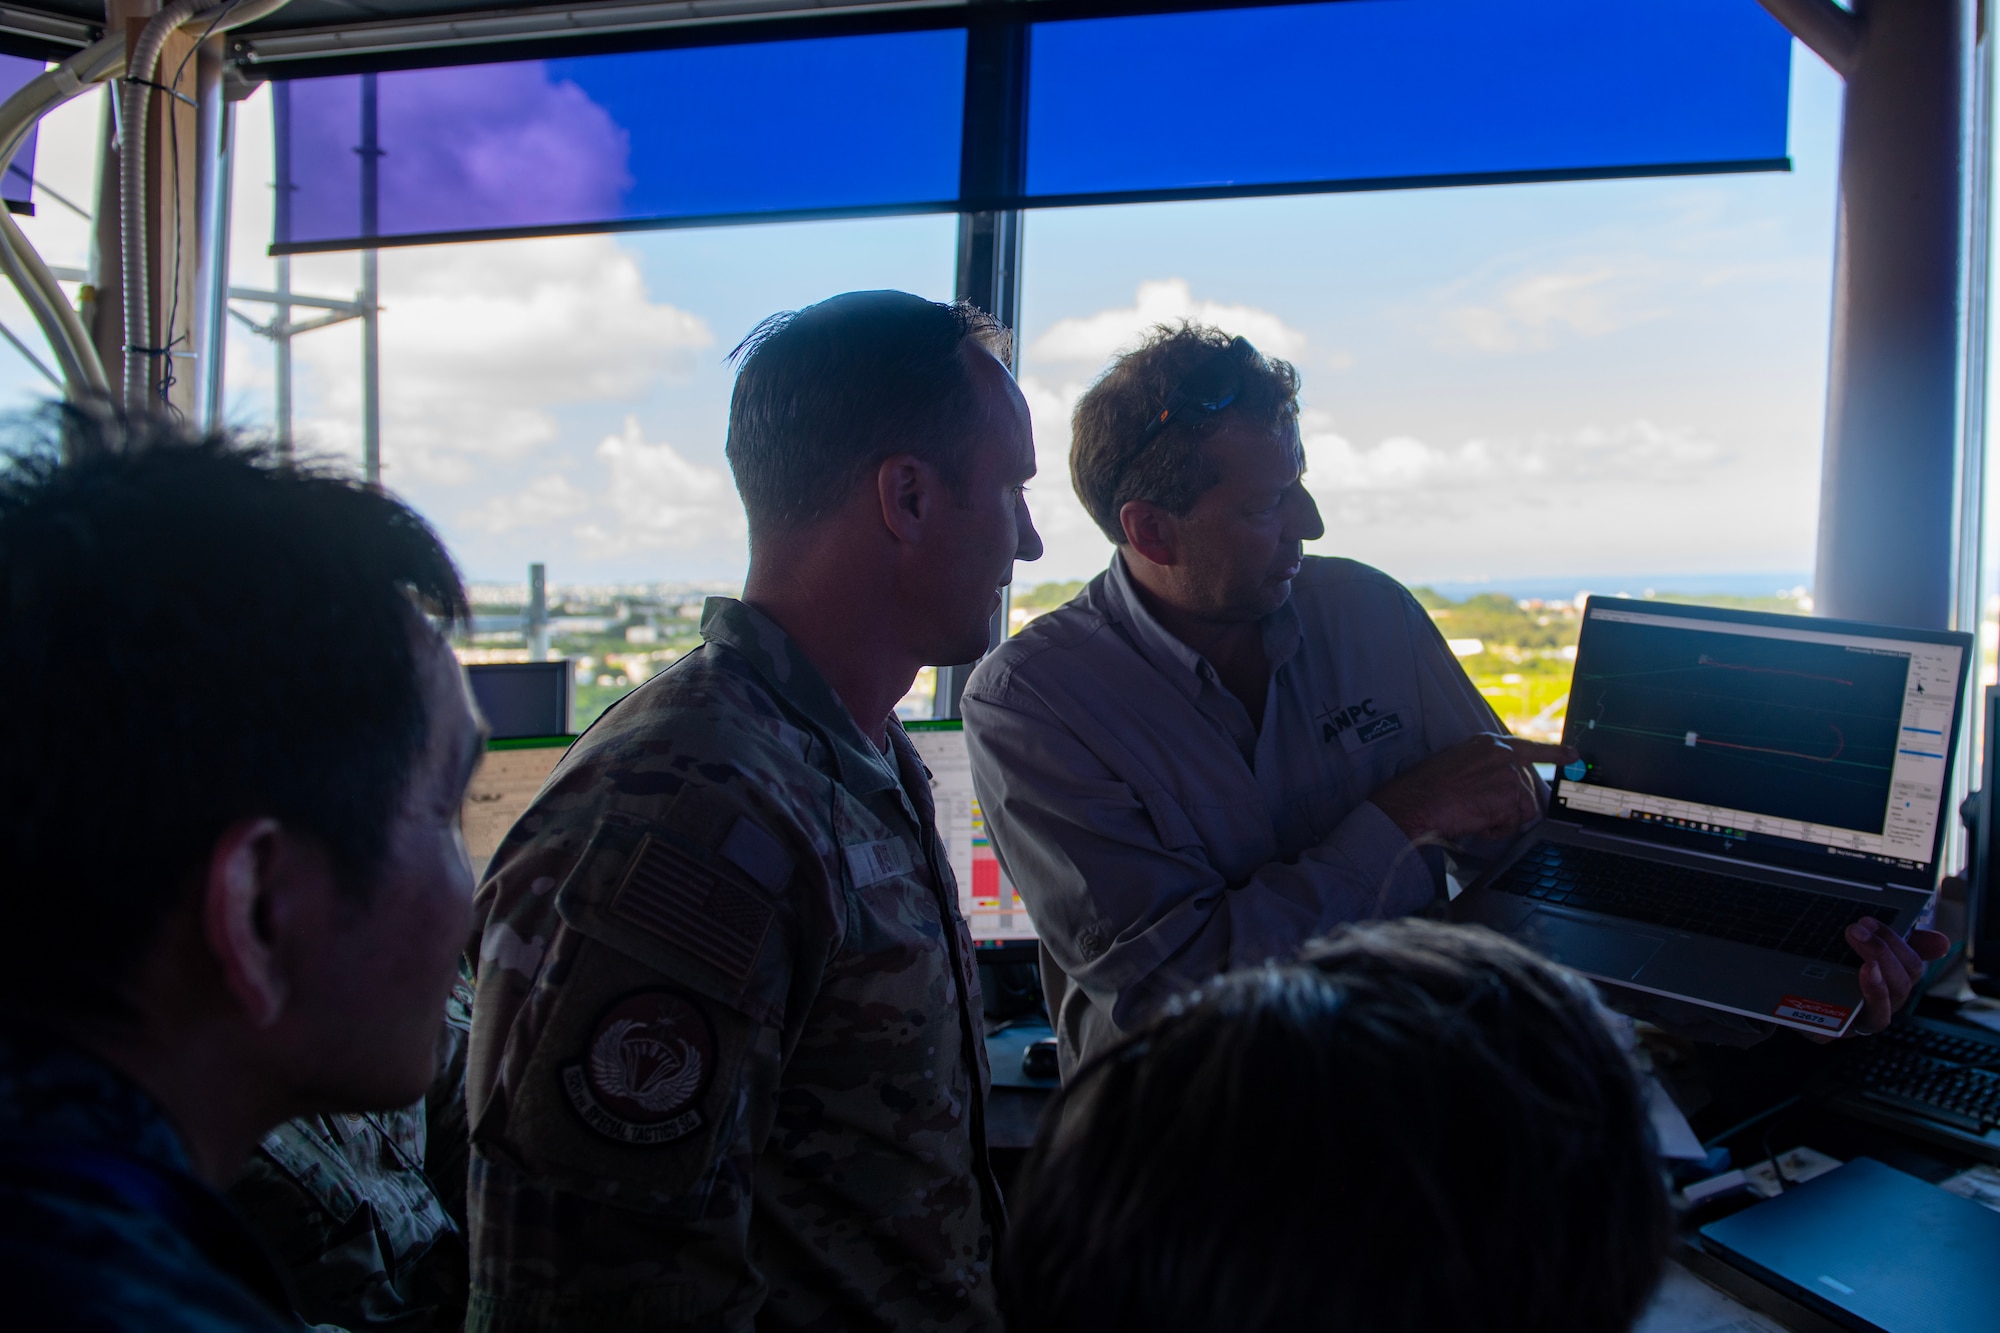 Chief Master Sgt with the 320th listens to a Transportable Transponder Landing System briefing.